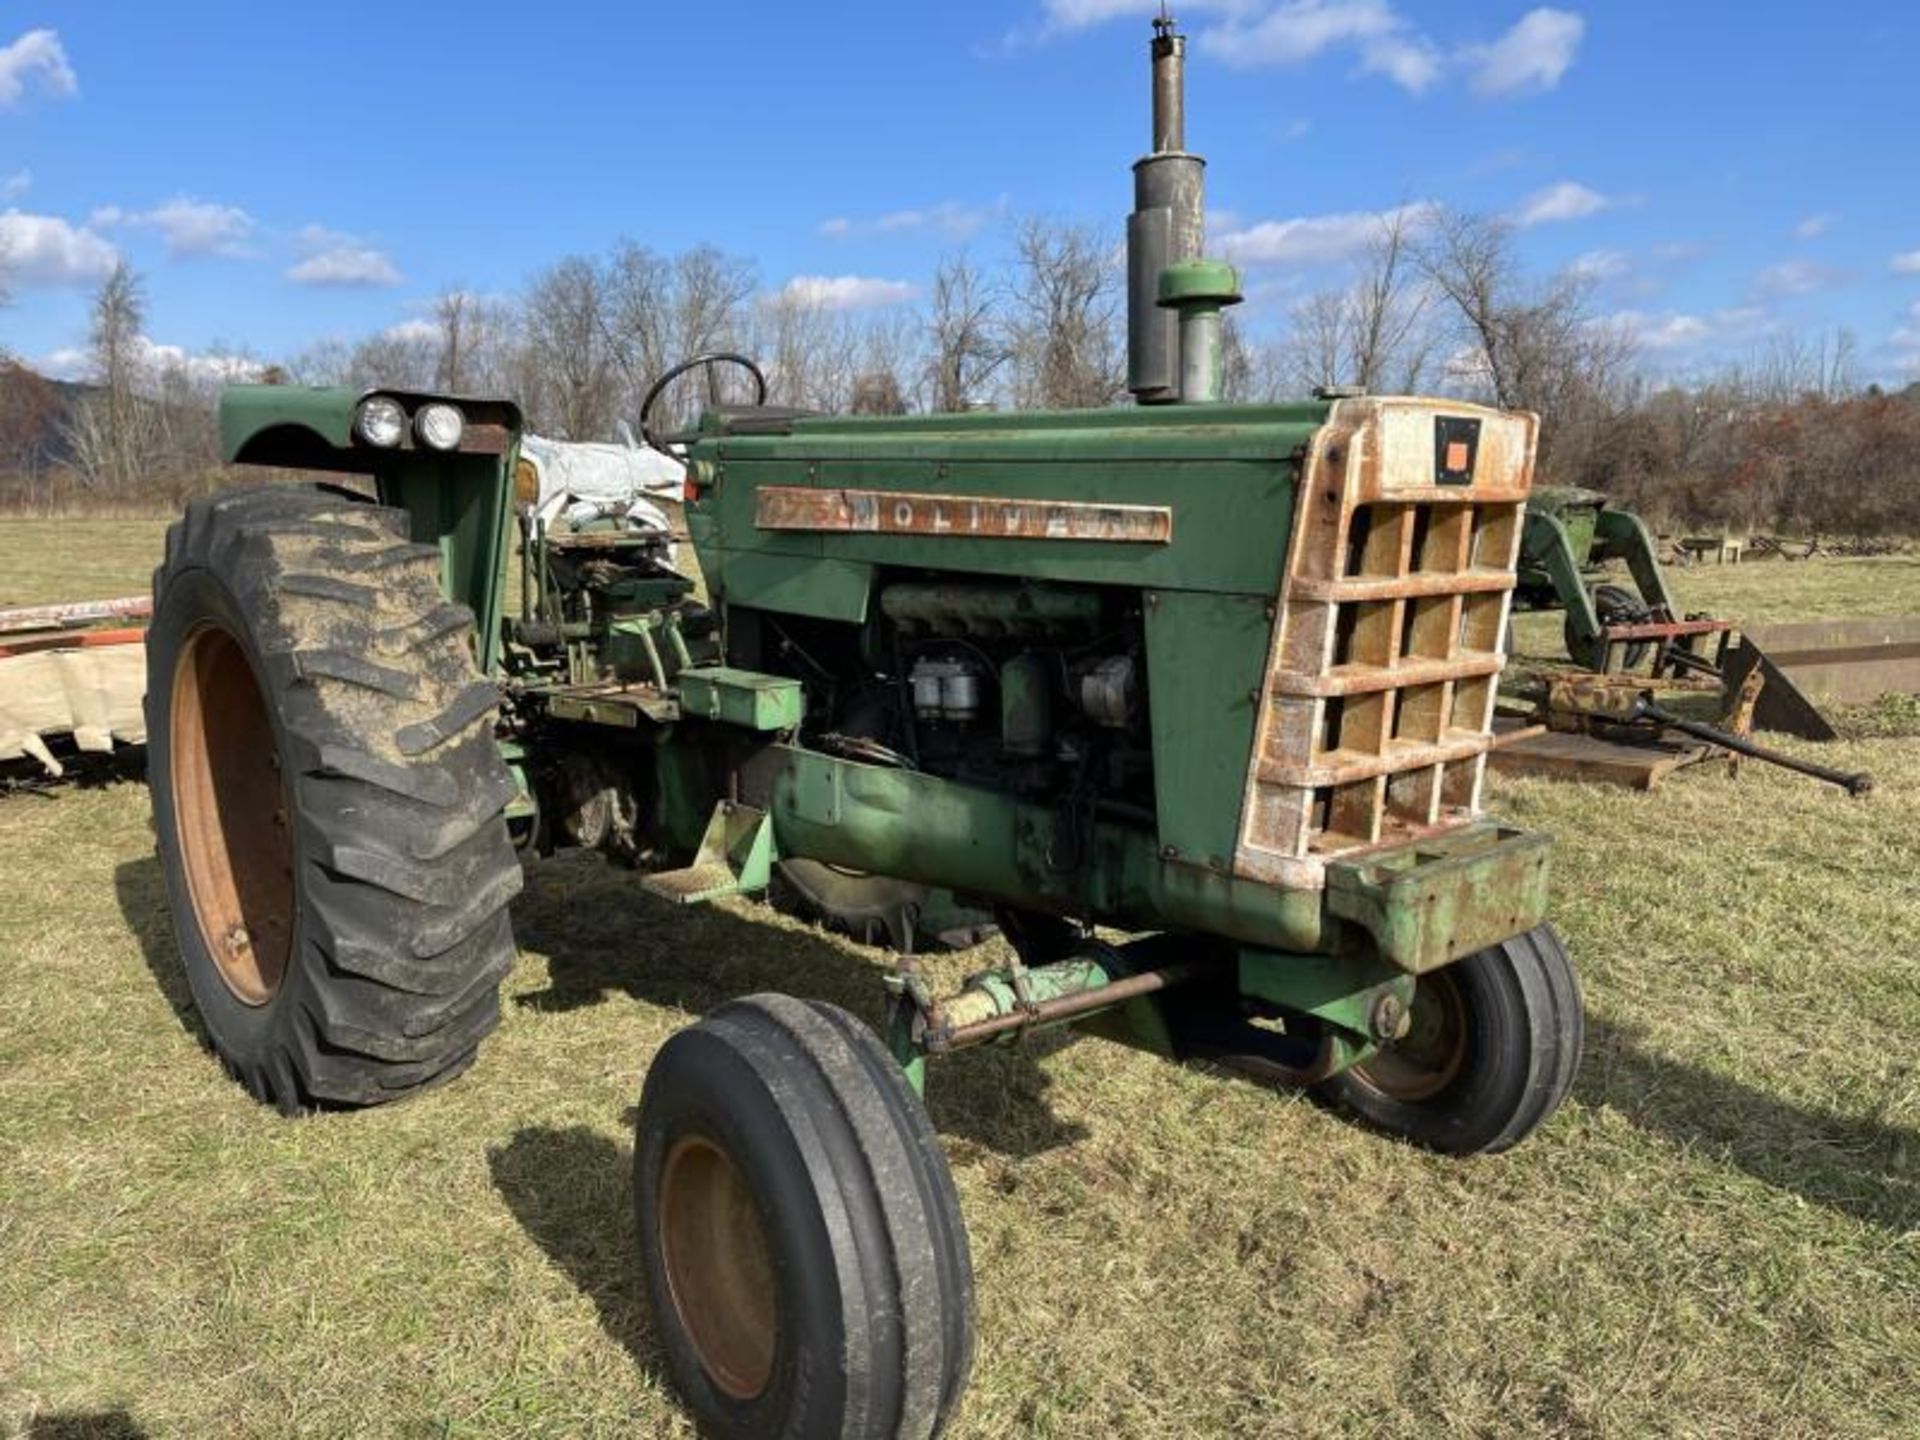 Oliver 1750 Tractor Diesel, 2 Wheel Drive, 3 Point Hitch, Double Remotes, Runs with Jump Start, No